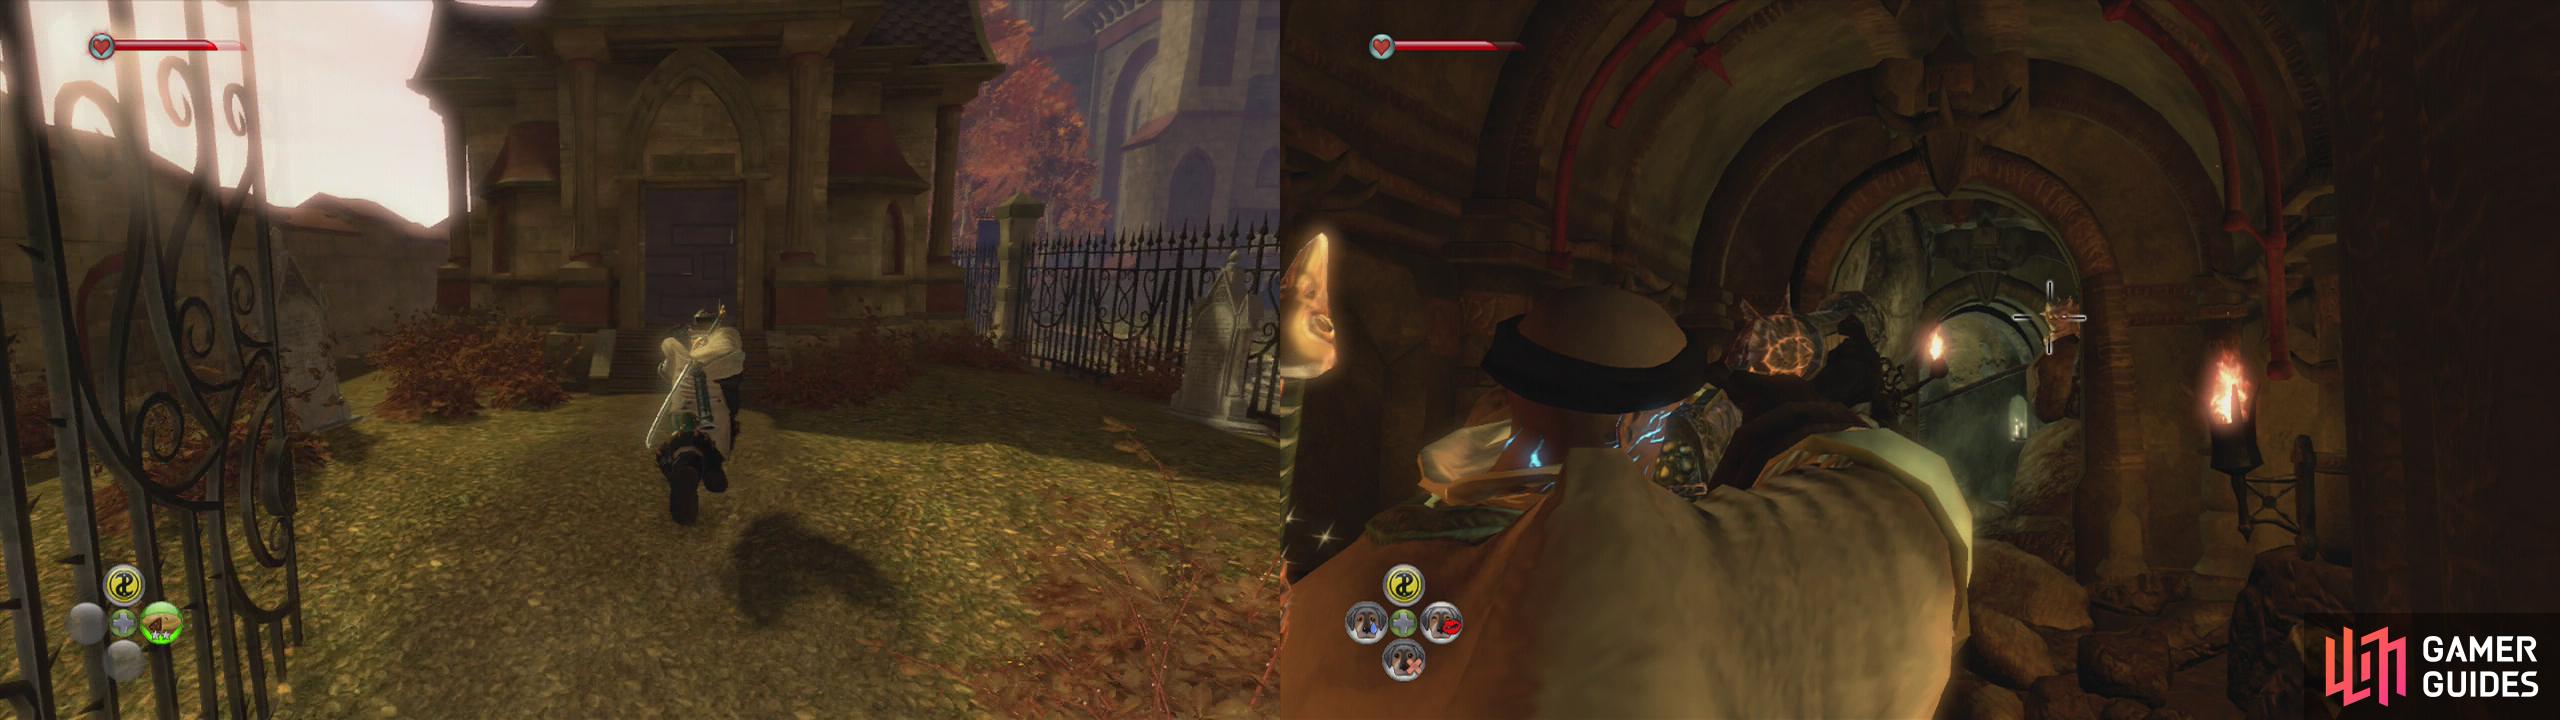 Enter Lady Grey’s Tomb in Fairfax Gardens (left). Shoot the gargoyle before jumping down the hole (right).